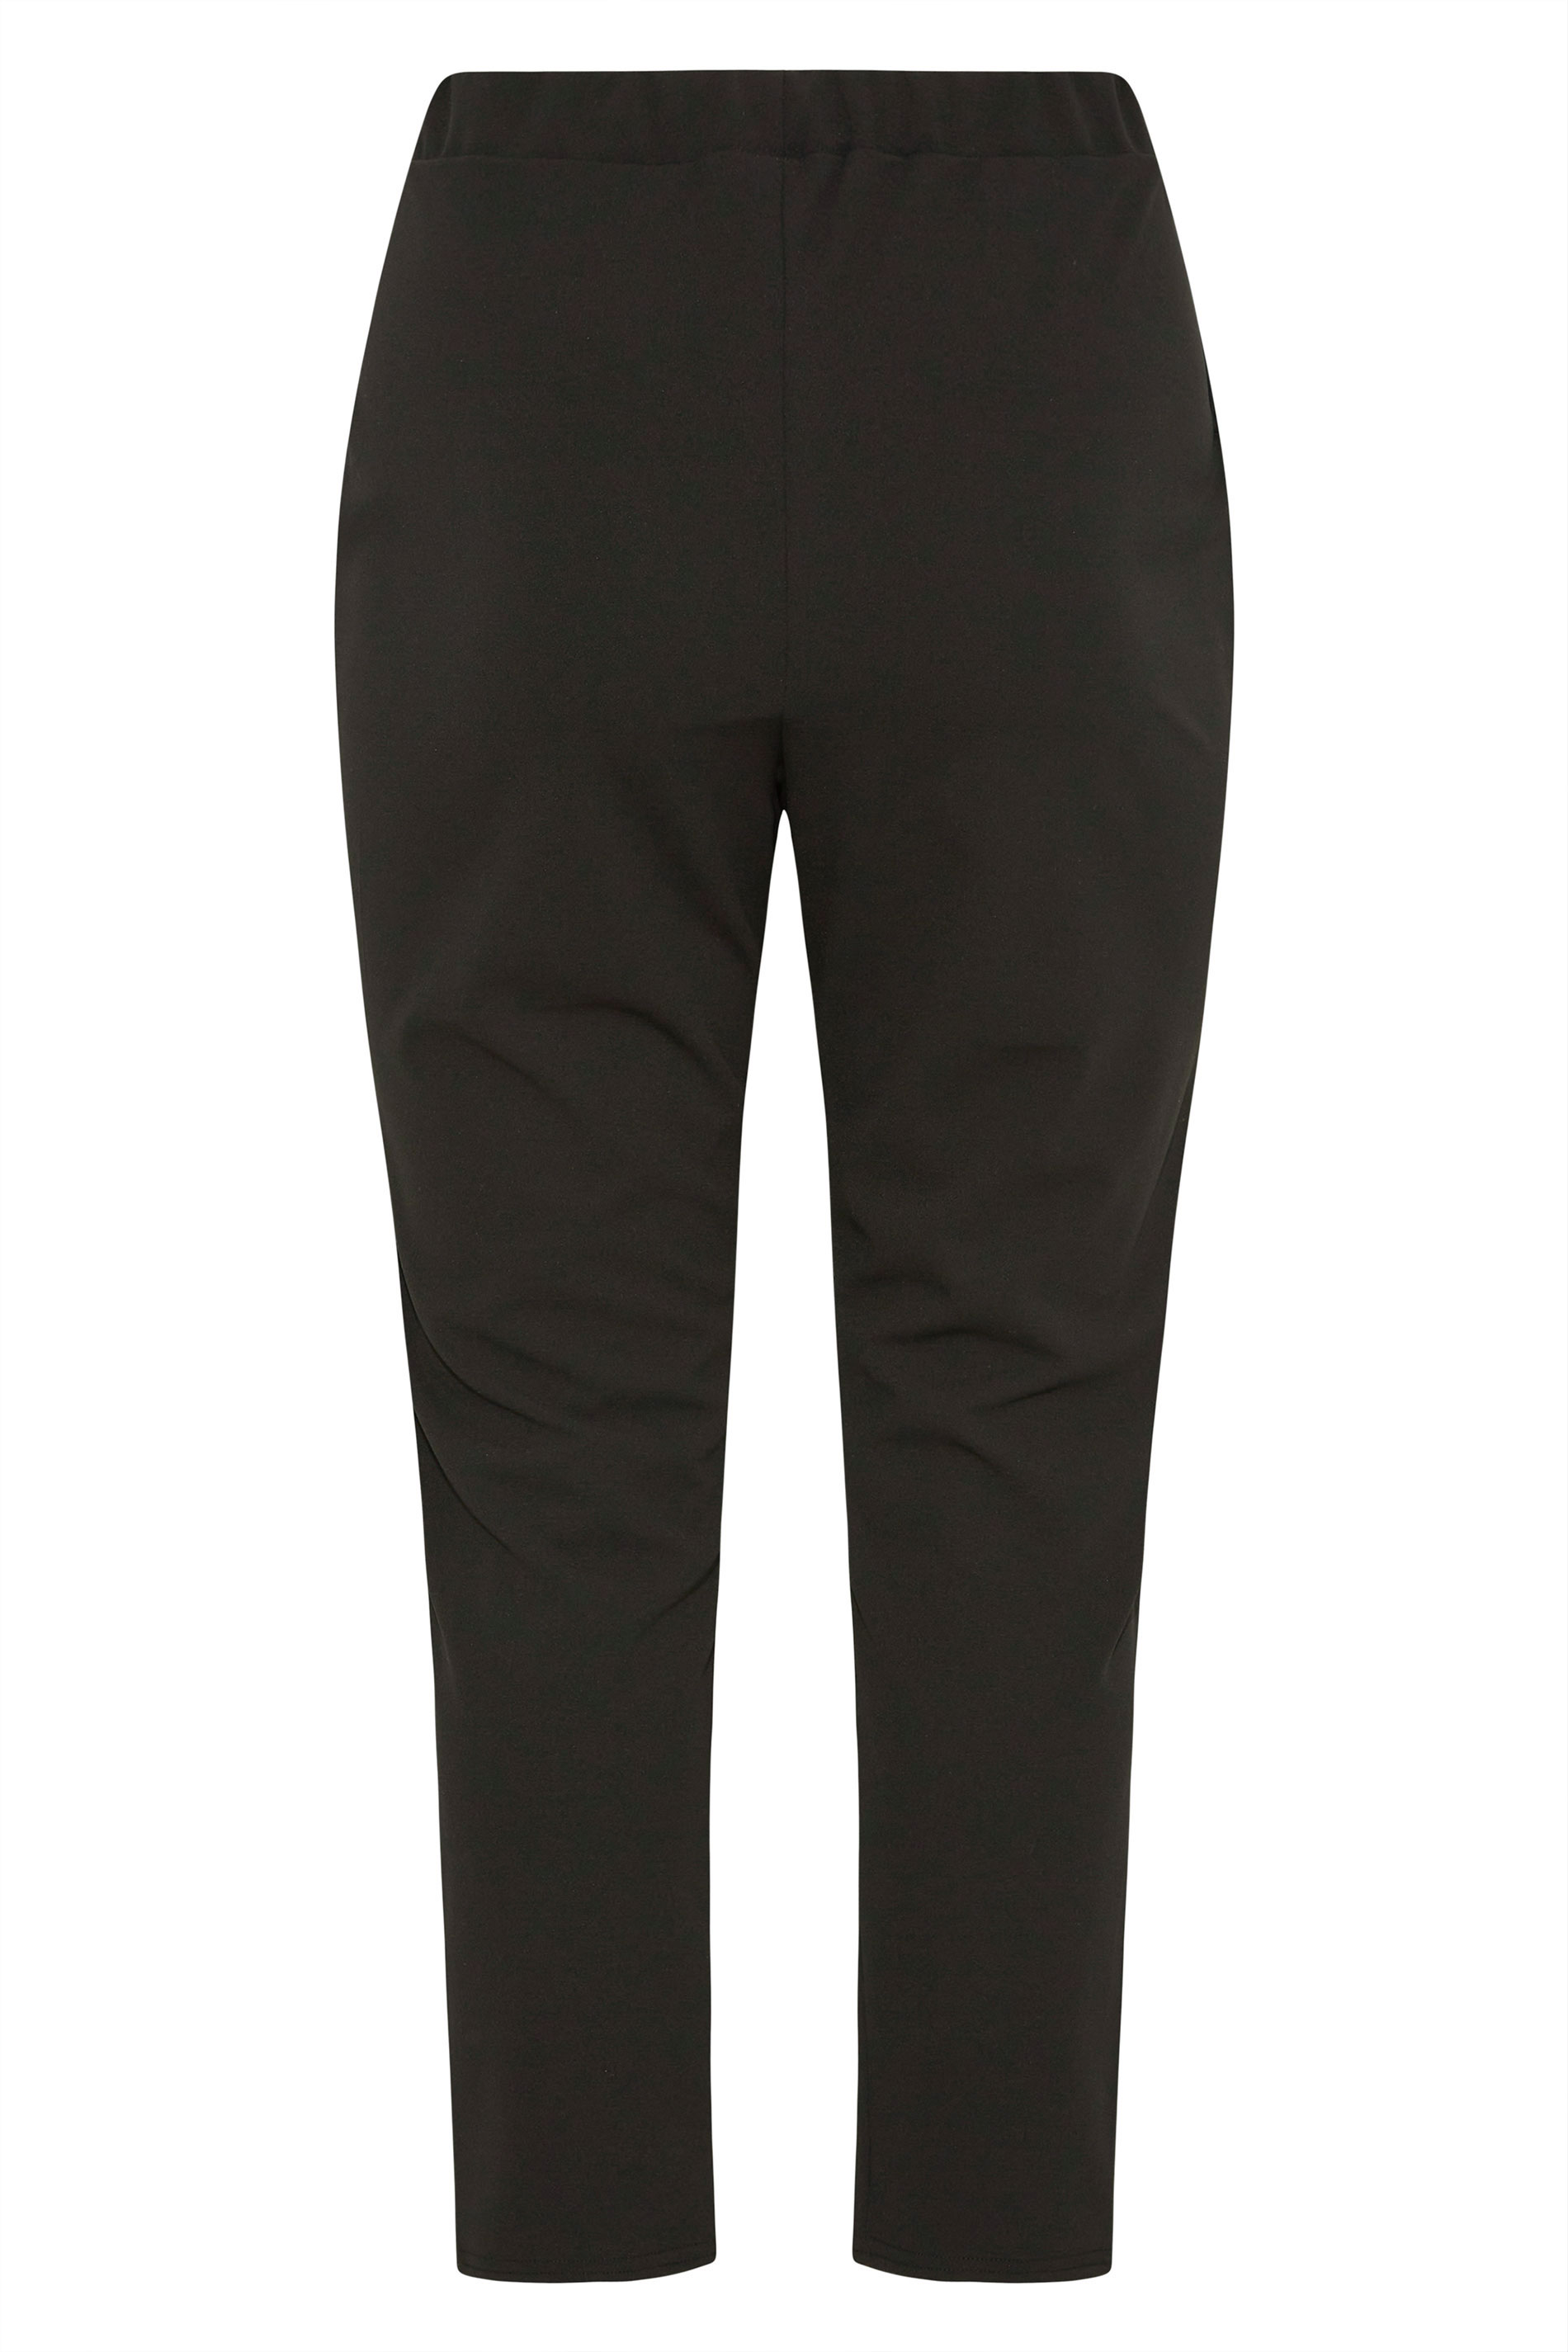 M&Co Green Stretch Tapered Trousers